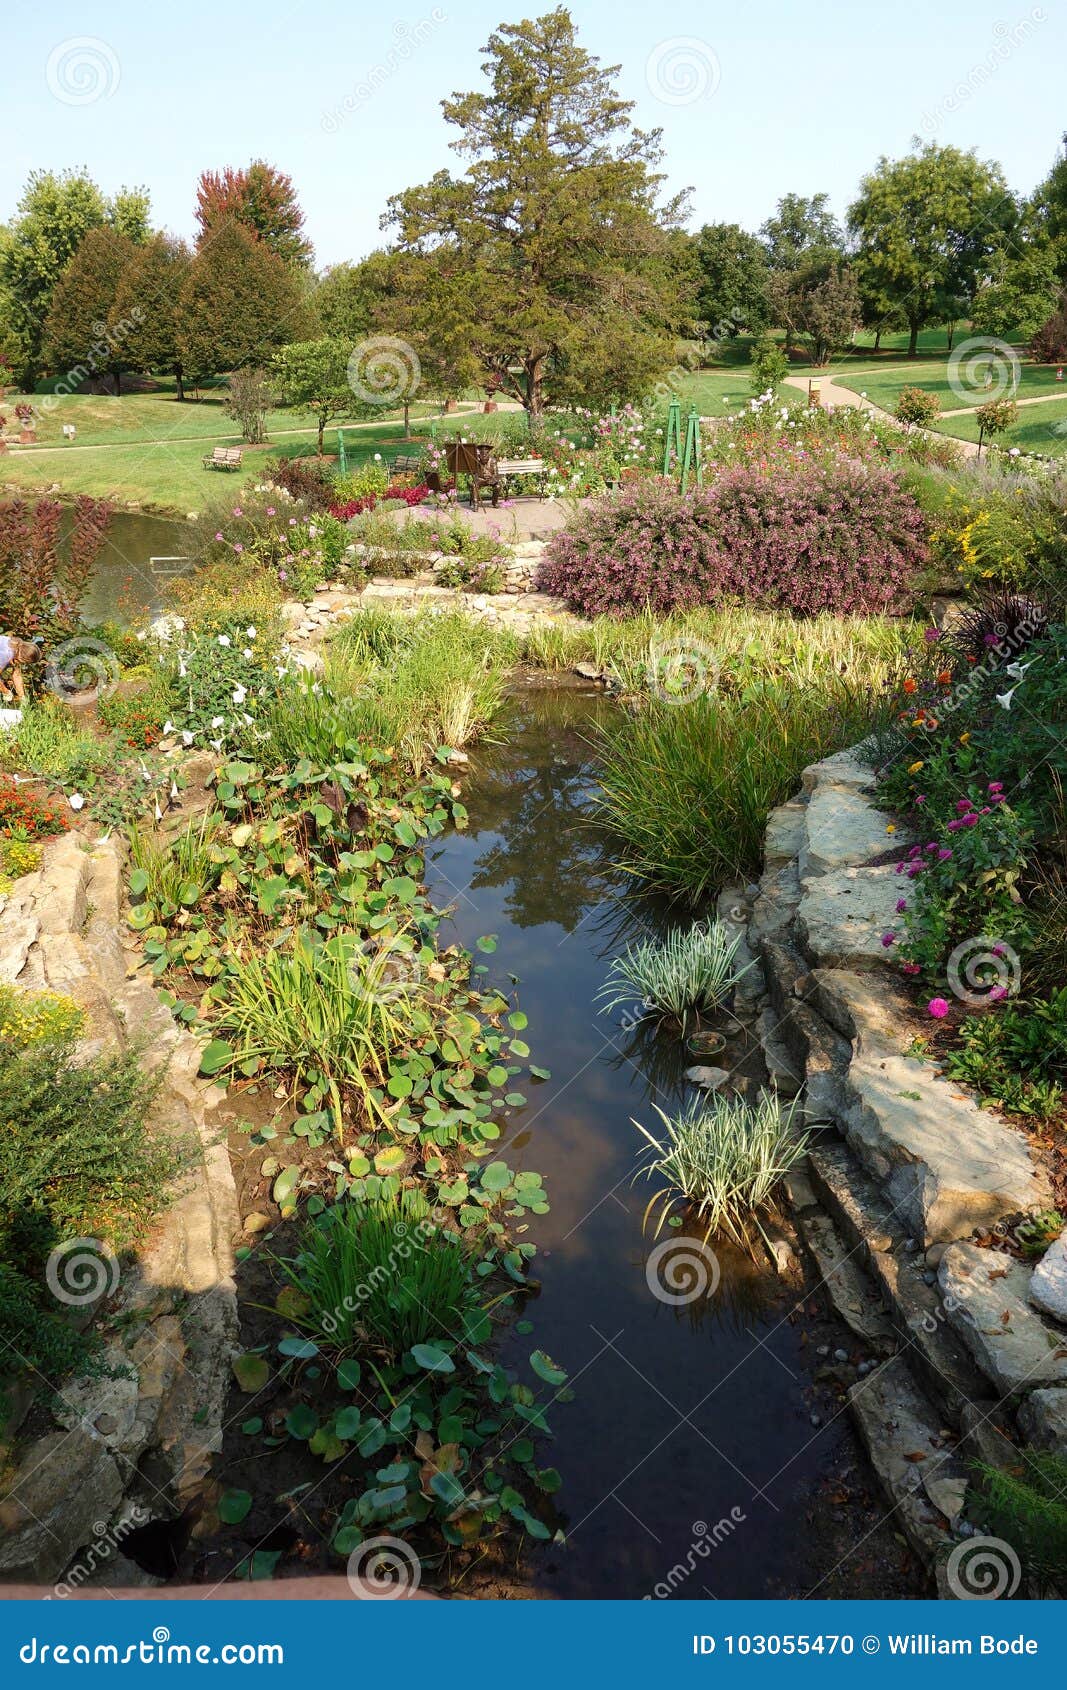 botanical flower garden with water feature stock photo - image of